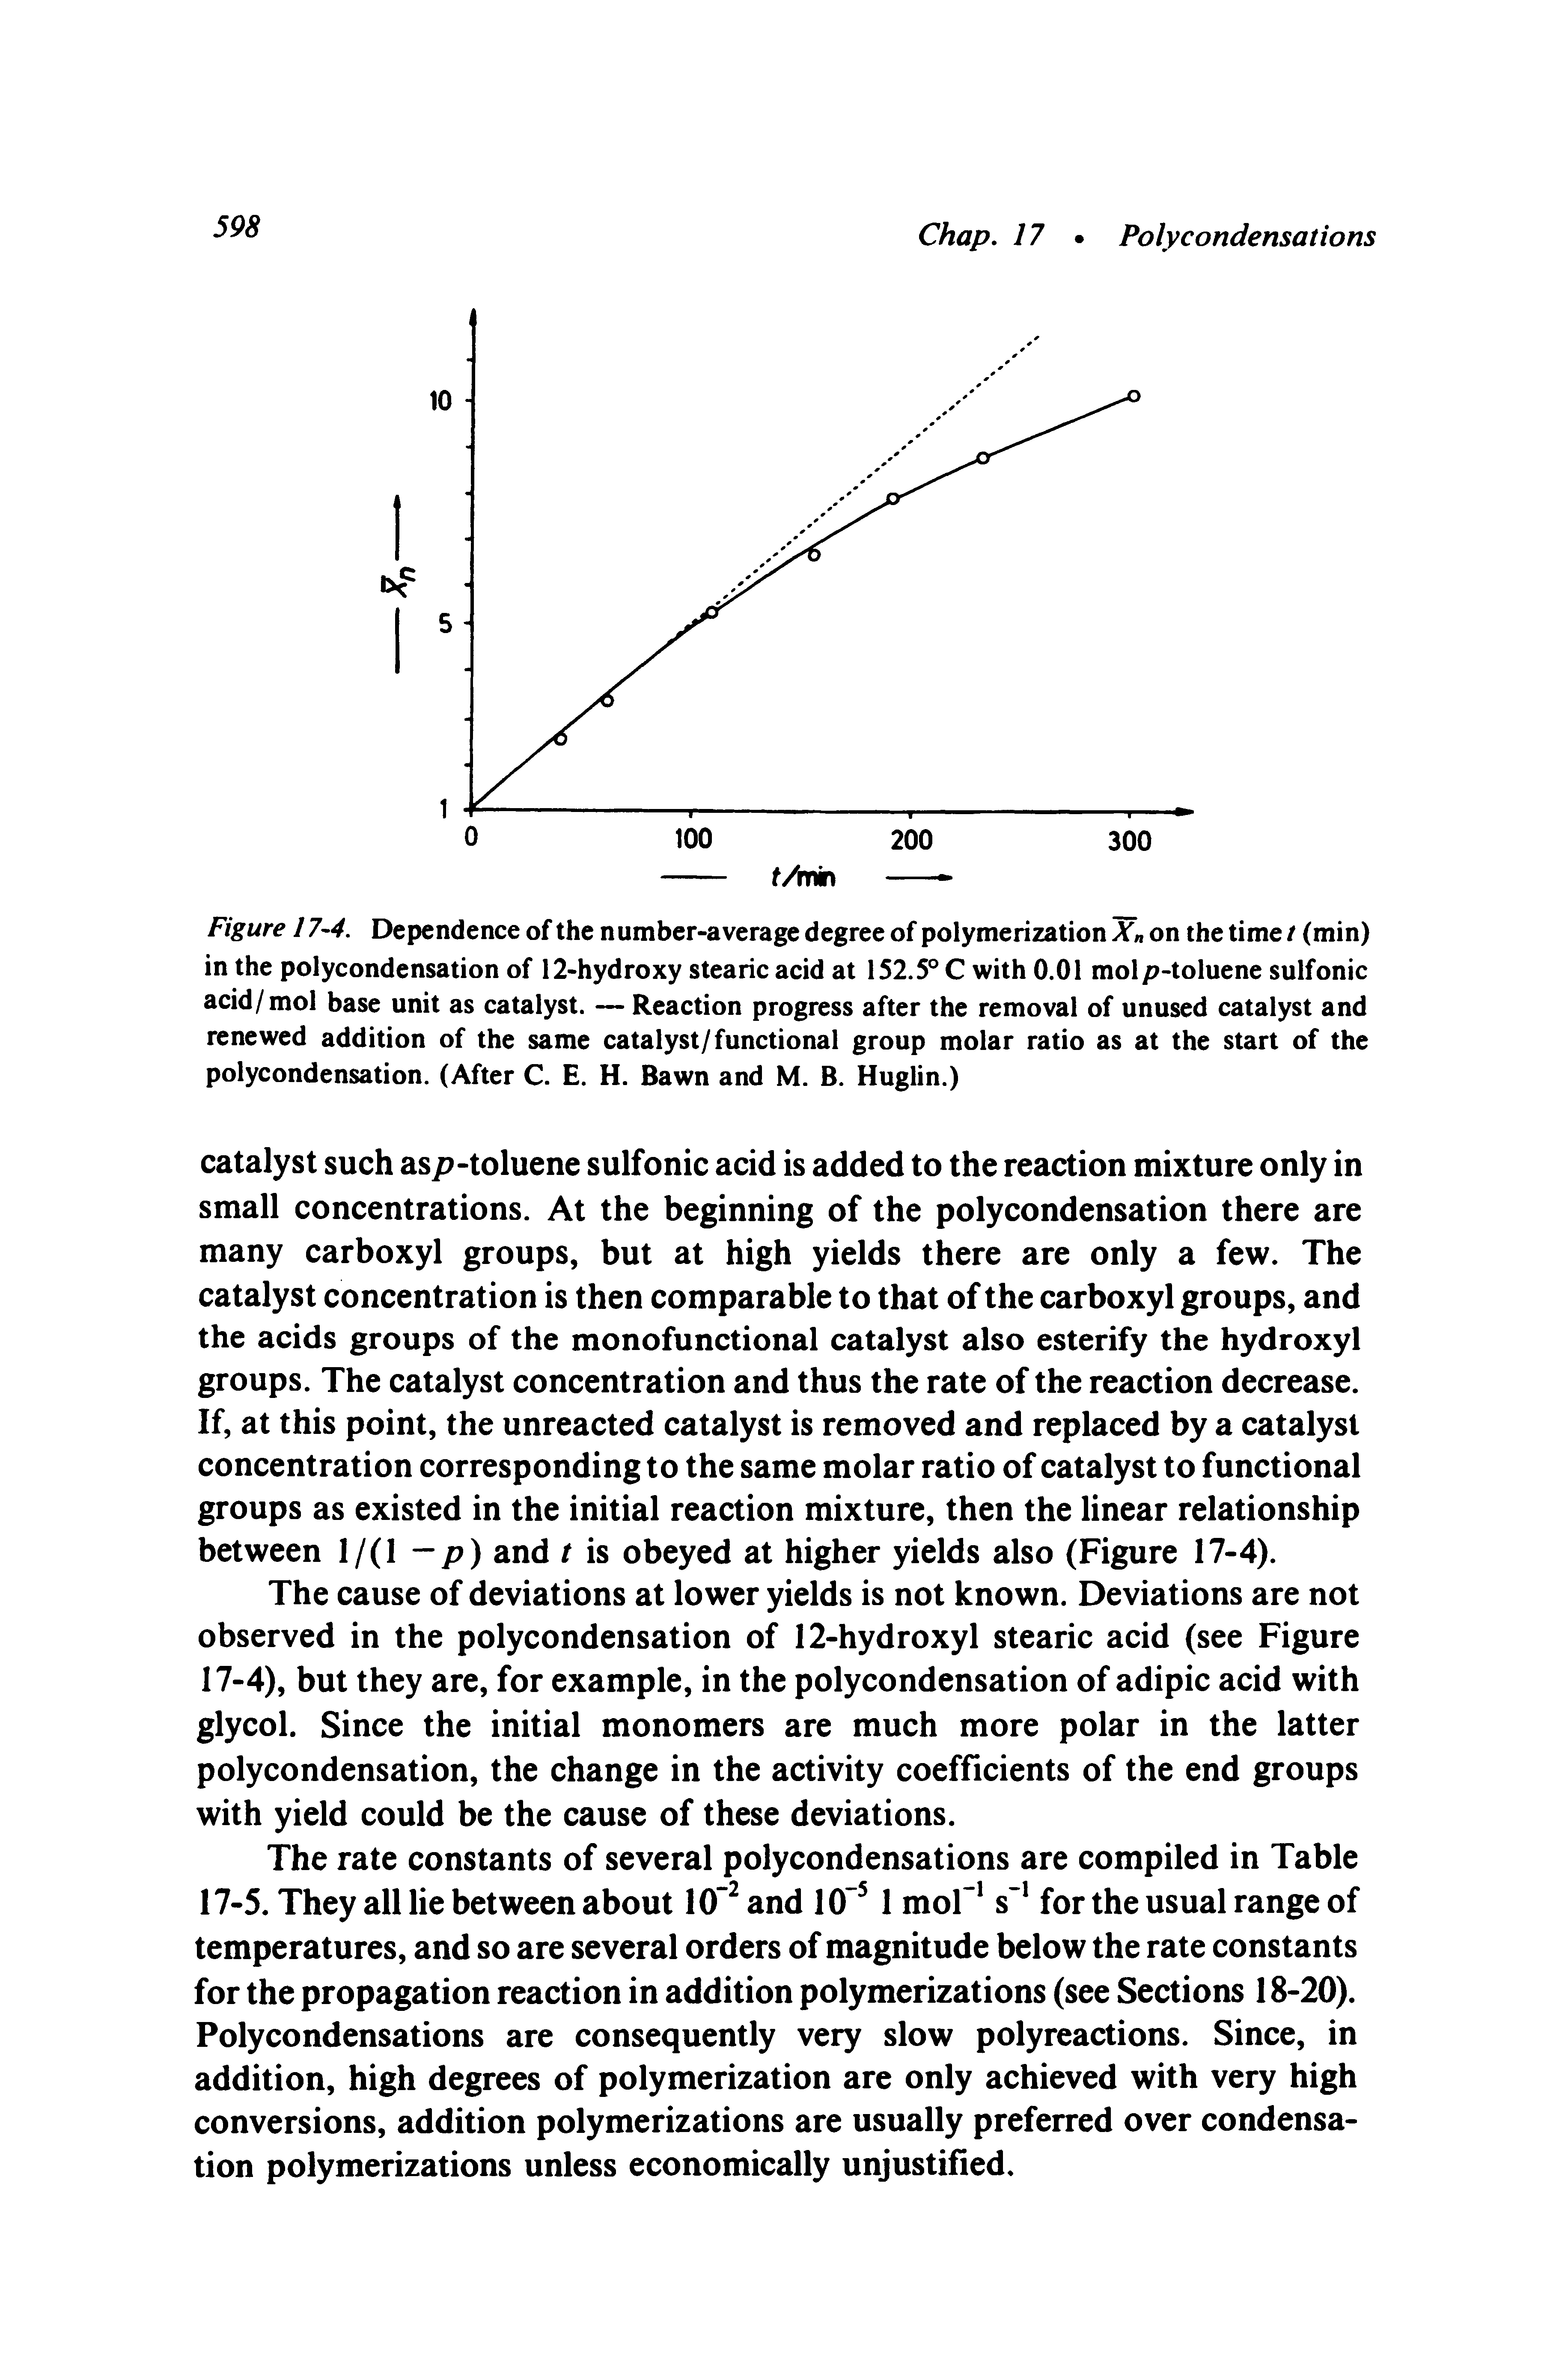 Figure 17-4. Dependence of the n umber-average degree of polymerization ICn on the time / (min) in the polycondensation of 12-hydroxy stearic acid at 152.5° C with 0.01 molp-toluene sulfonic acid / mol base unit as catalyst. — Reaction progress after the removal of unused catalyst and renewed addition of the same catalyst/functional group molar ratio as at the start of the polycondensation. (After C. E. H. Bawn and M. B. Huglin.)...